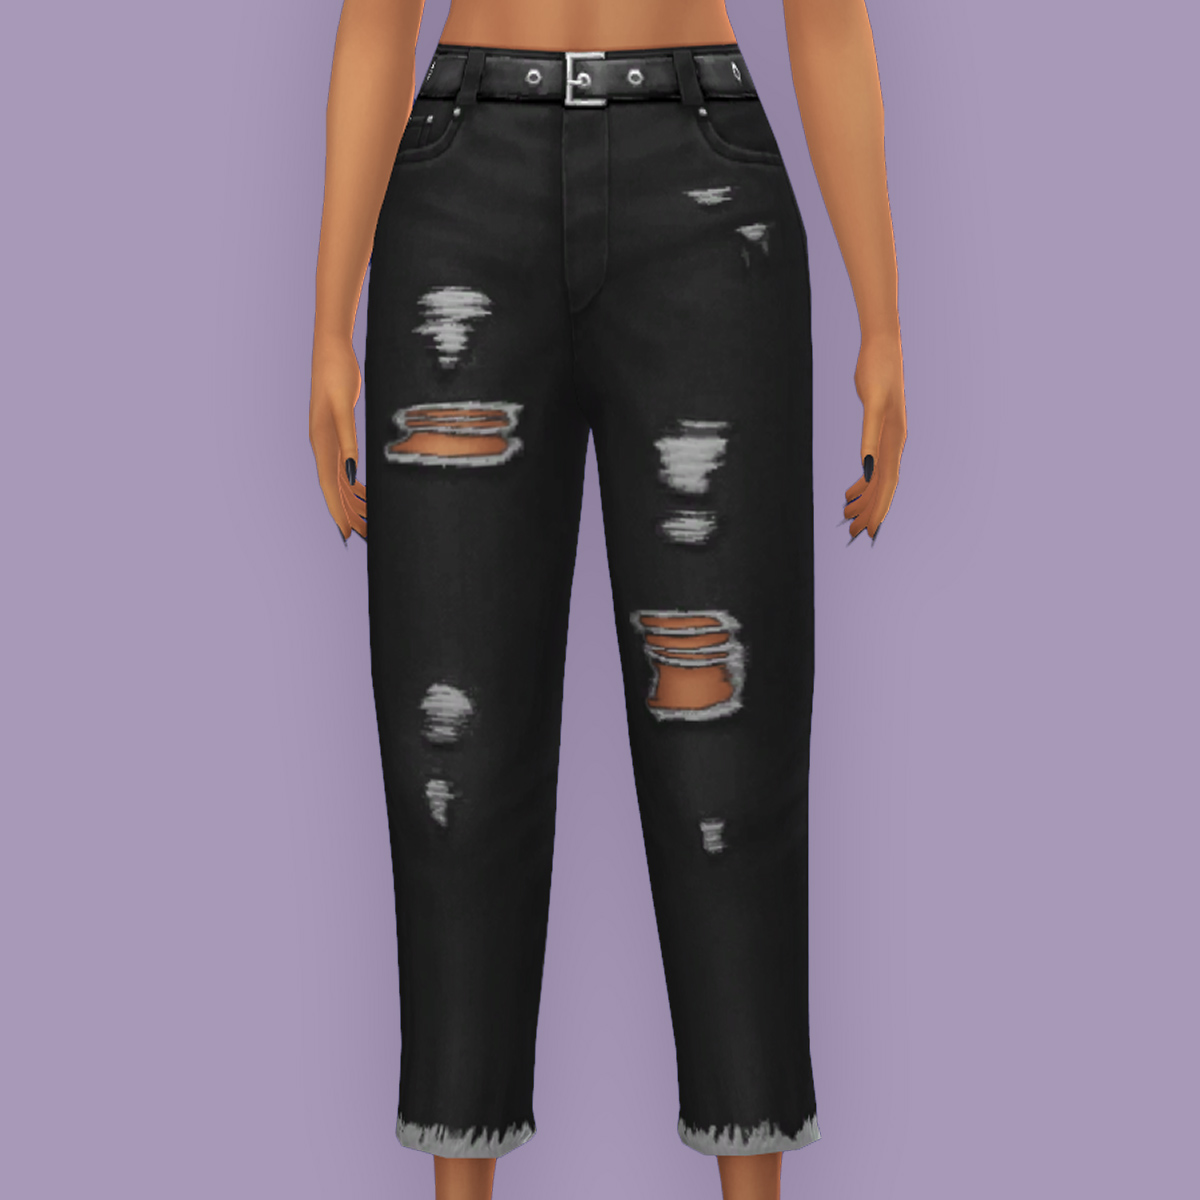 QICC - Darcy Jeans project avatar